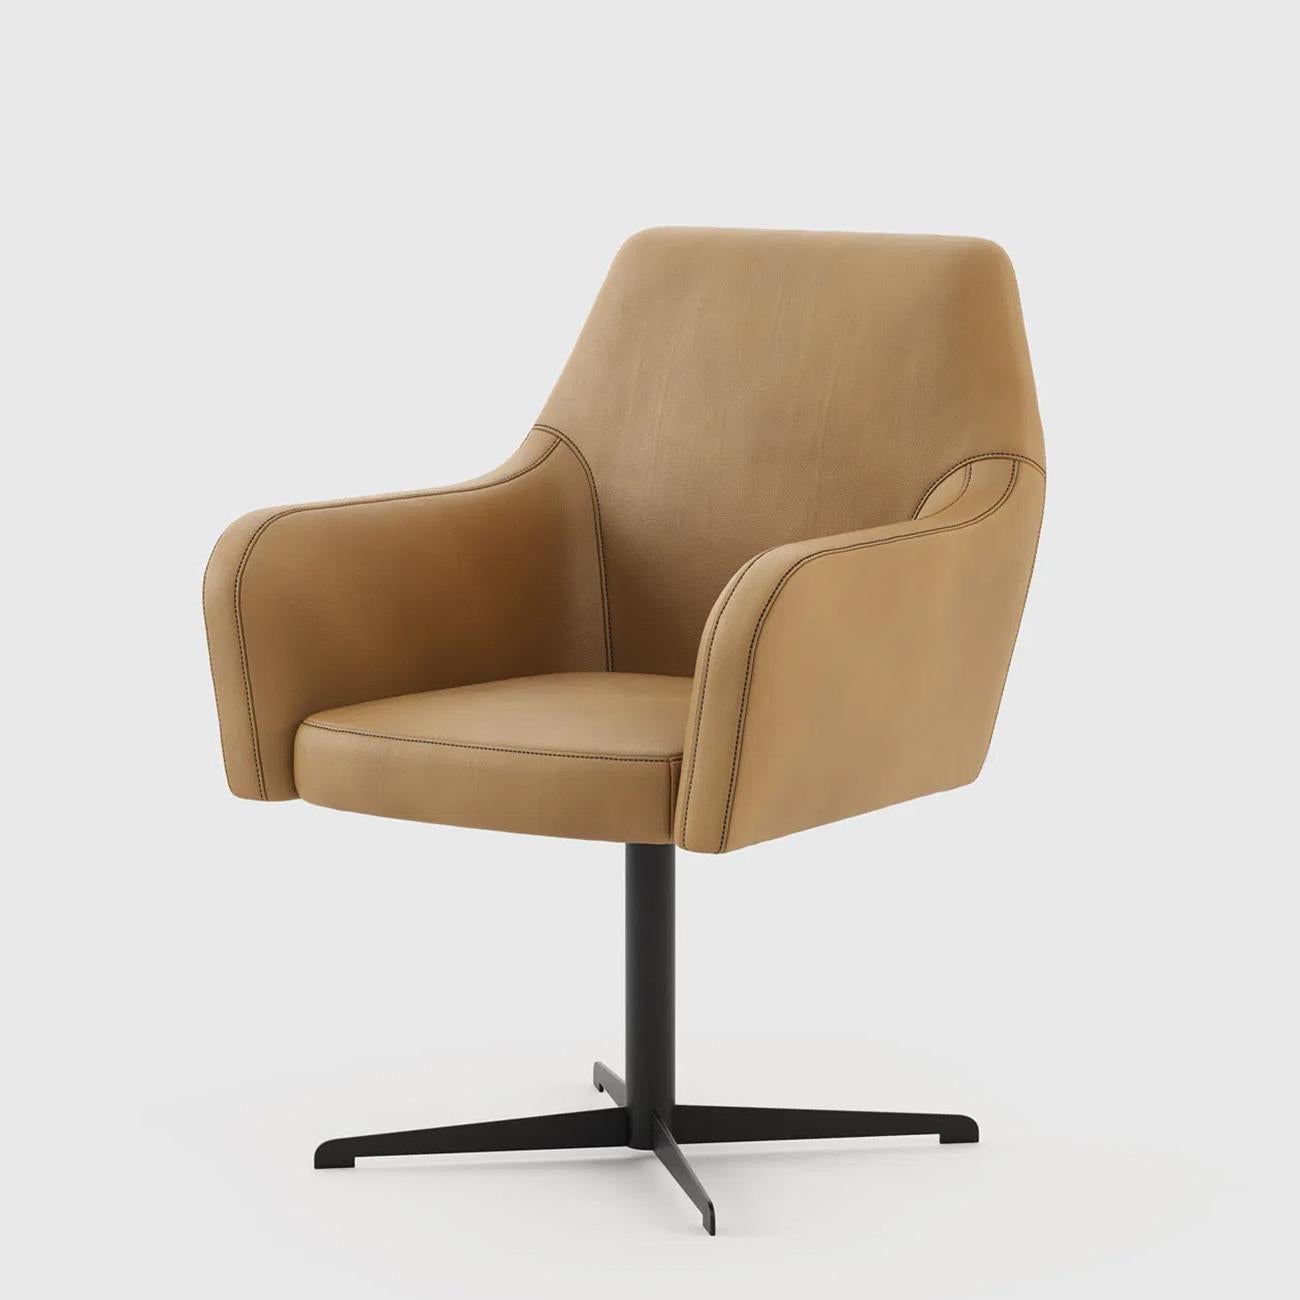 Office chair Bount with solid wood structure
upholstered and covered with camel leather.
Swivel desk chair with blackened iron base.
Also available with other leather finish or fabrics
on request.